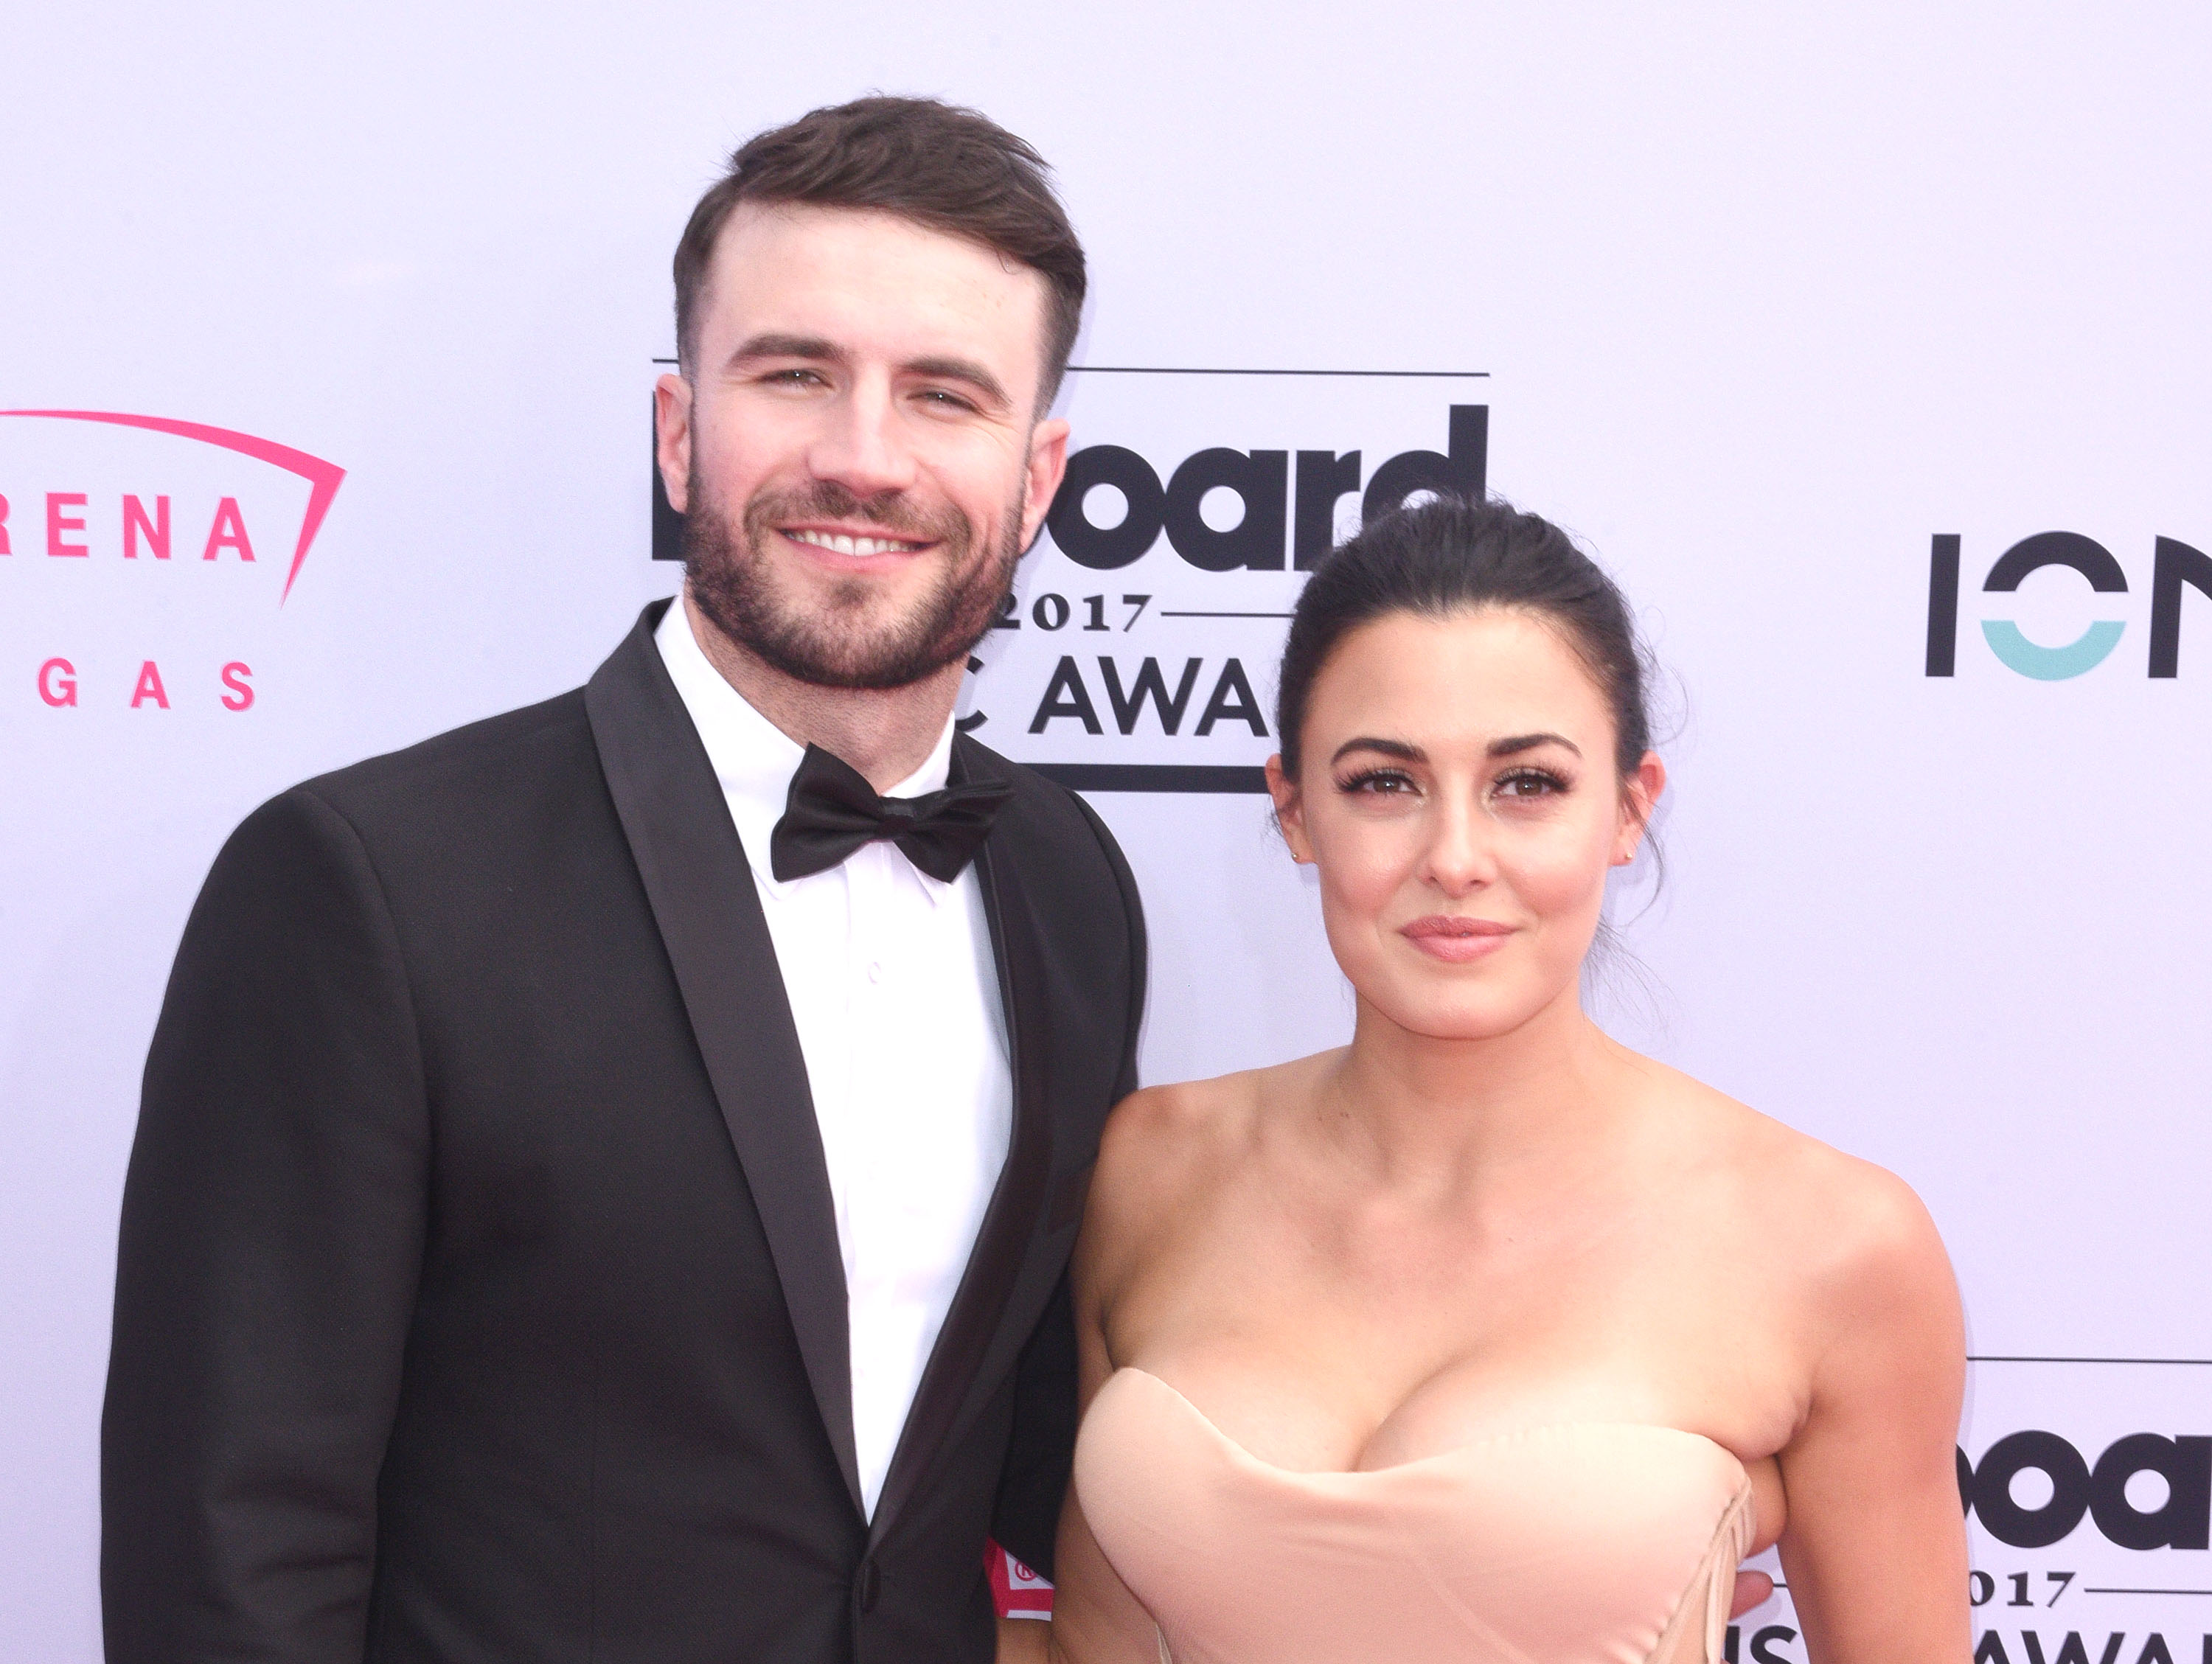 <p>Sam Hunt's wife of nearly five years, Hannah Lee Fowler, dropped some bombshells in a February 2022, divorce filing, <a href="https://www.tmz.com/2022/02/21/sam-hunts-pregnant-wife-divorce-adultery/">TMZ</a> reported -- including claims that the country music star cheated on her. In court documents, Hannah alleged that the "Body Like a Back Road" singer was guilty of "inappropriate marital conduct" and "adultery." On top of that, she publicly revealed for the first time that she was pregnant (she gave birth to their first child in May 2022). In a curious twist, Hannah withdrew her divorce filing just a few hours after she made it, <a href="https://people.com/country/sam-hunt-pregnant-wife-withdraws-divorce-complaint/">People</a> magazine confirmed. However, TMZ <span>later clarified that she simply filed for divorce in the wrong county, so her lawyers remedied the situation by refiling in the correct jurisdiction.</span> But just a few months later in April 2022, Hannah asked the court to dismiss the divorce case and a judge signed off, <a href="https://www.tmz.com/2022/05/08/sam-hunt-divorce-called-off-pregnant-wife/">TMZ</a> reported on May 8, 2022, adding that the singer and his wife had been spotted walking their dog together in Franklin, Tennessee, before the reconciliation news broke -- and that he'd started wearing his wedding ring again. </p>